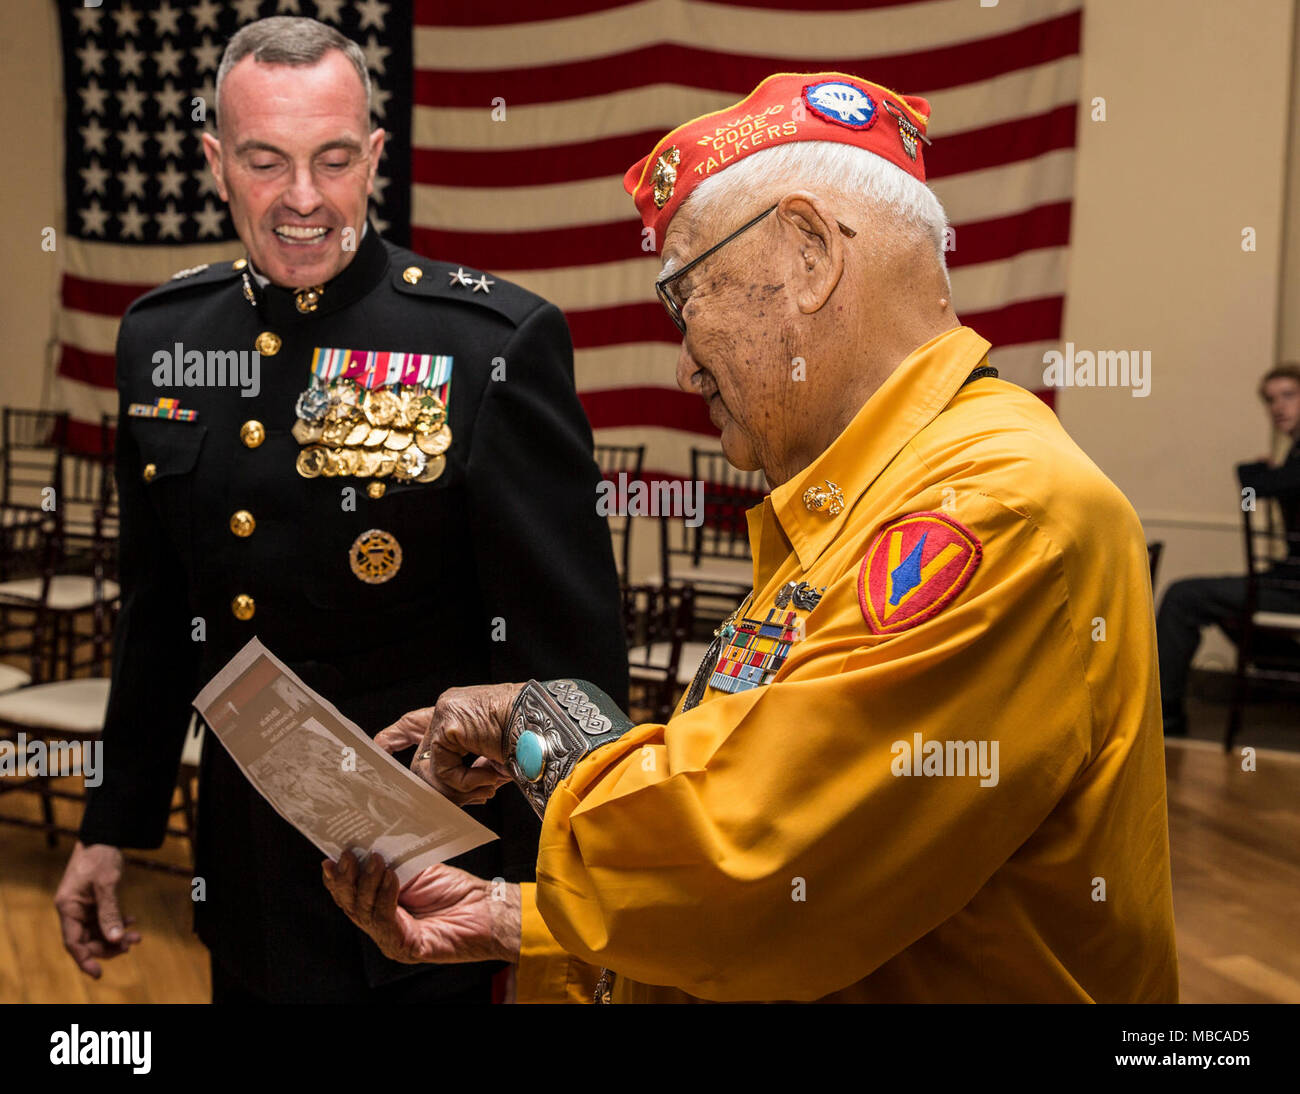 Thomas H Begay, Navajo Code Talker and survivor of the Battle of Iwo Jima, speaks with Maj. Gen. Vincent Coglianese at the 73rd Anniversary of the Battle of Iwo Jima celebration on Marine Corps Base Camp Pendleton, Calif., February 17, 2018. The evening included a sunset memorial, 21-gun salute and banquet. (U.S. Marine Corps Stock Photo